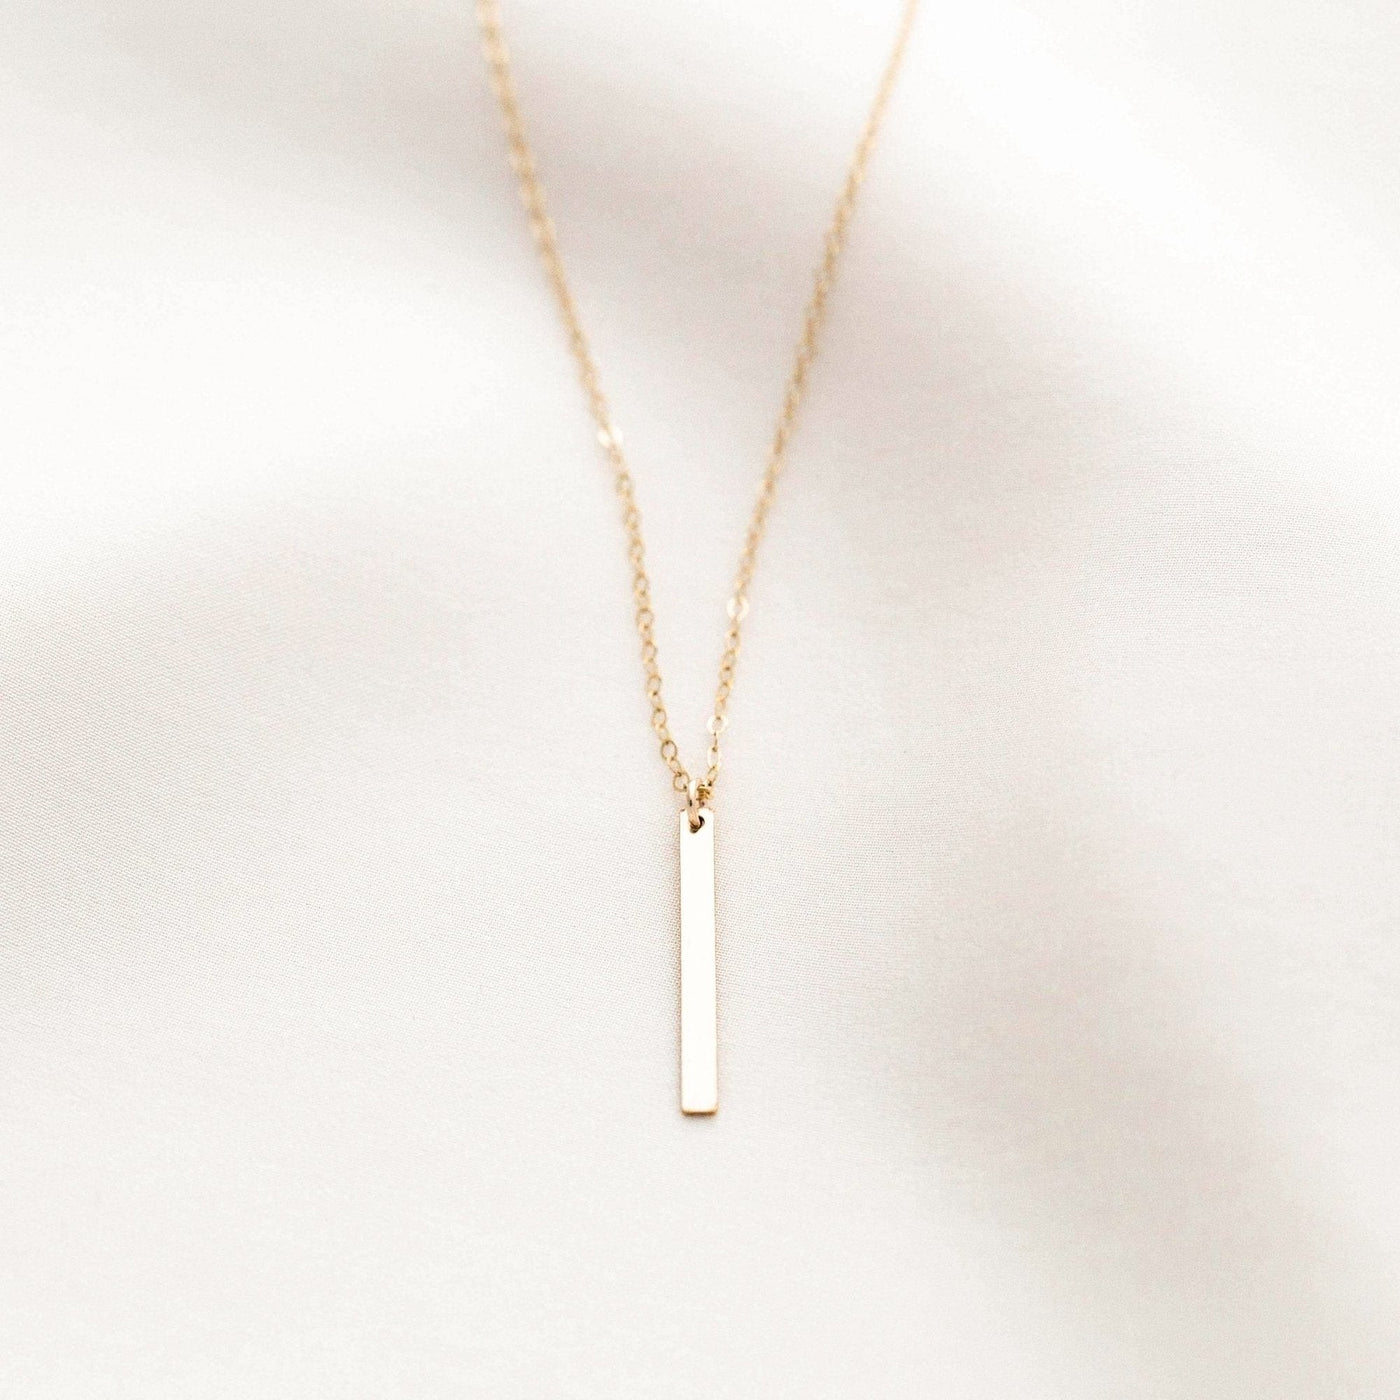 Hanging Bar Necklace by Simple & Dainty Jewelry